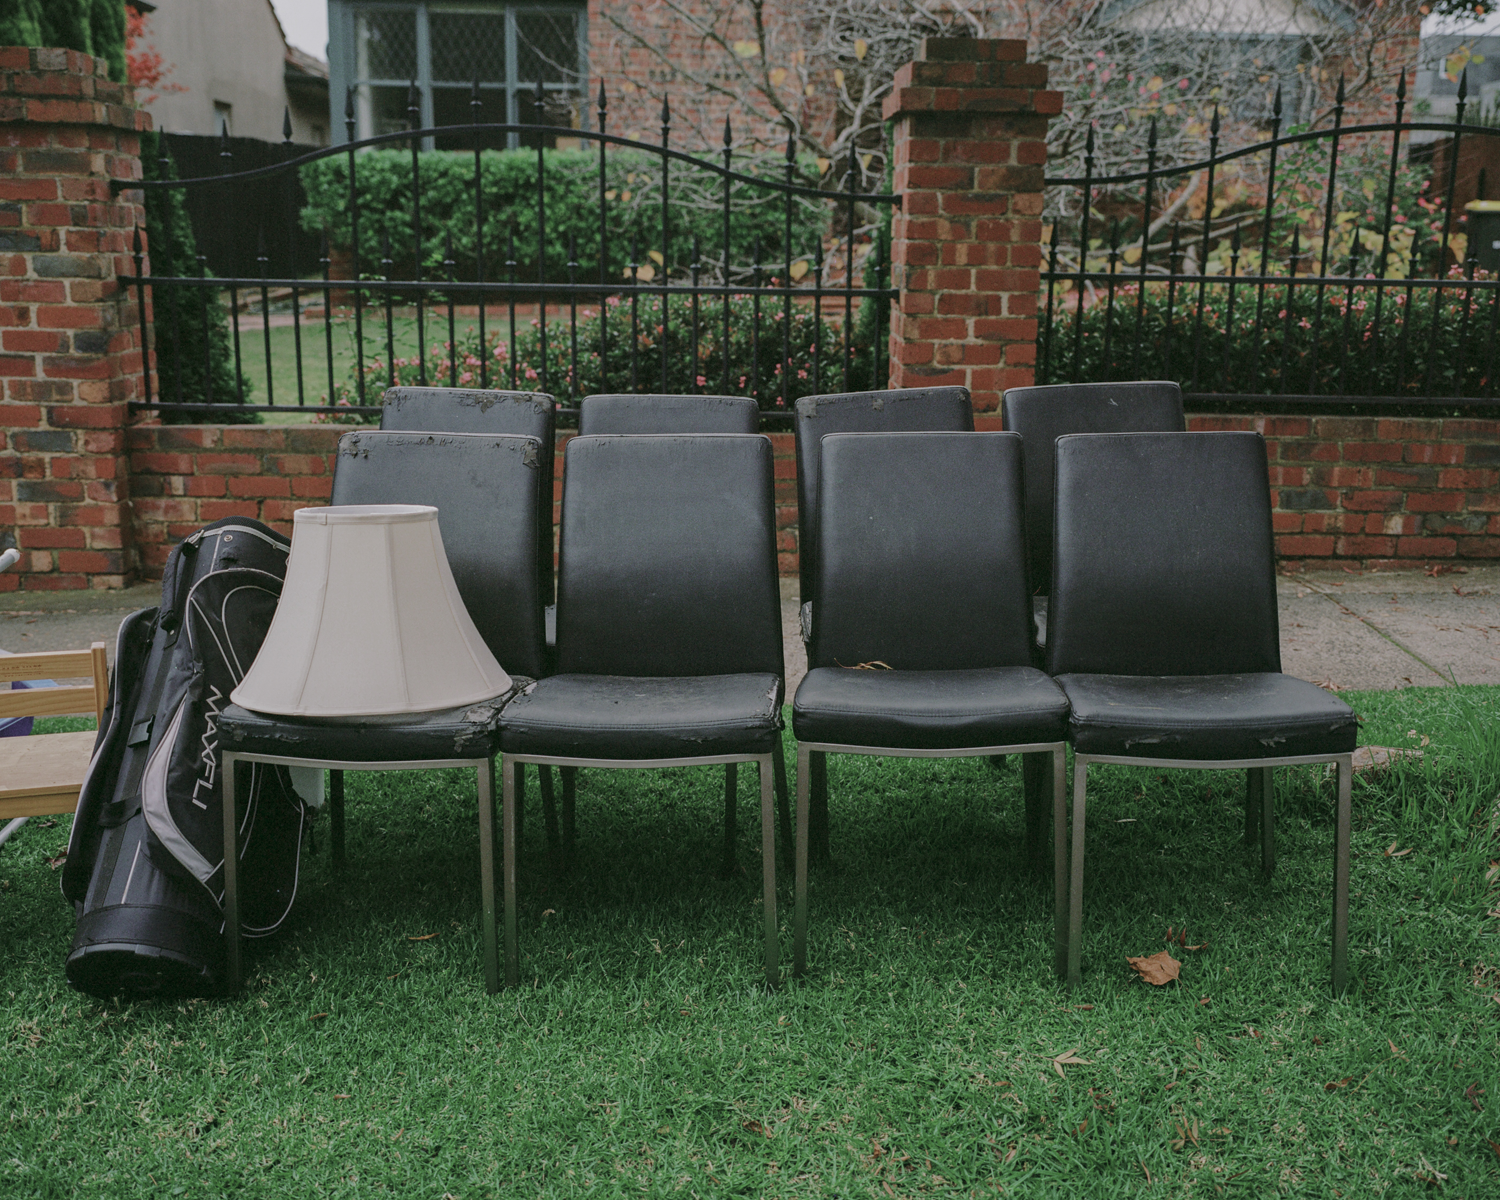 Colour photograph depicting four chairs, a lamp and a golf bag on a nature strip.